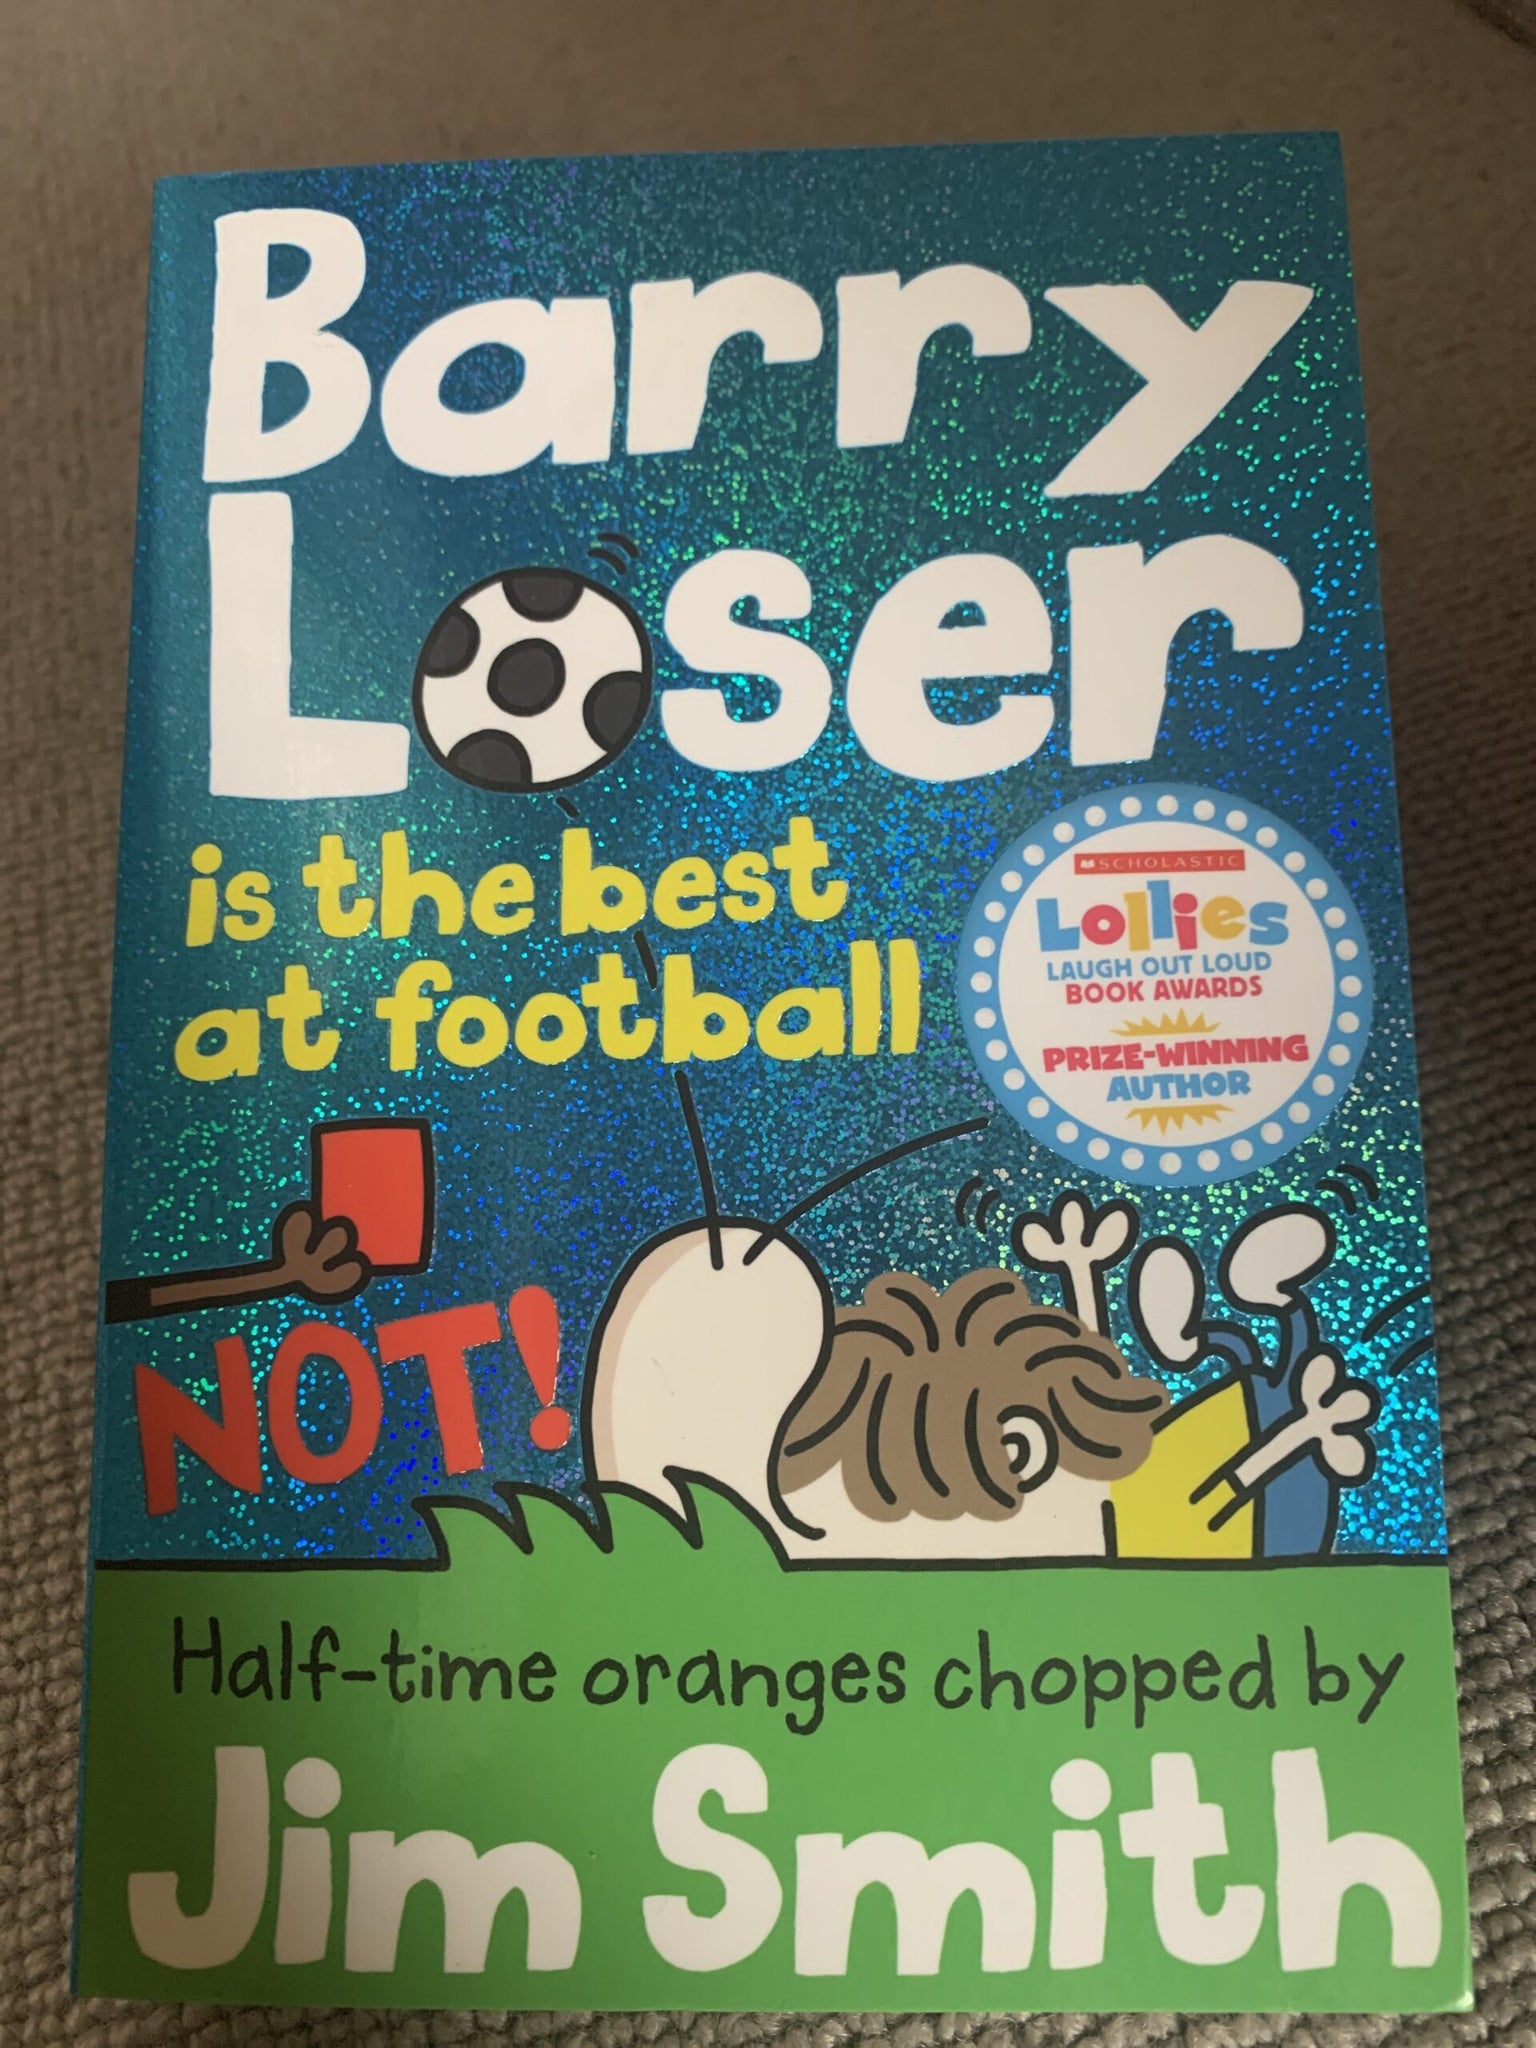 Barry Loser is the best at football - NOT!